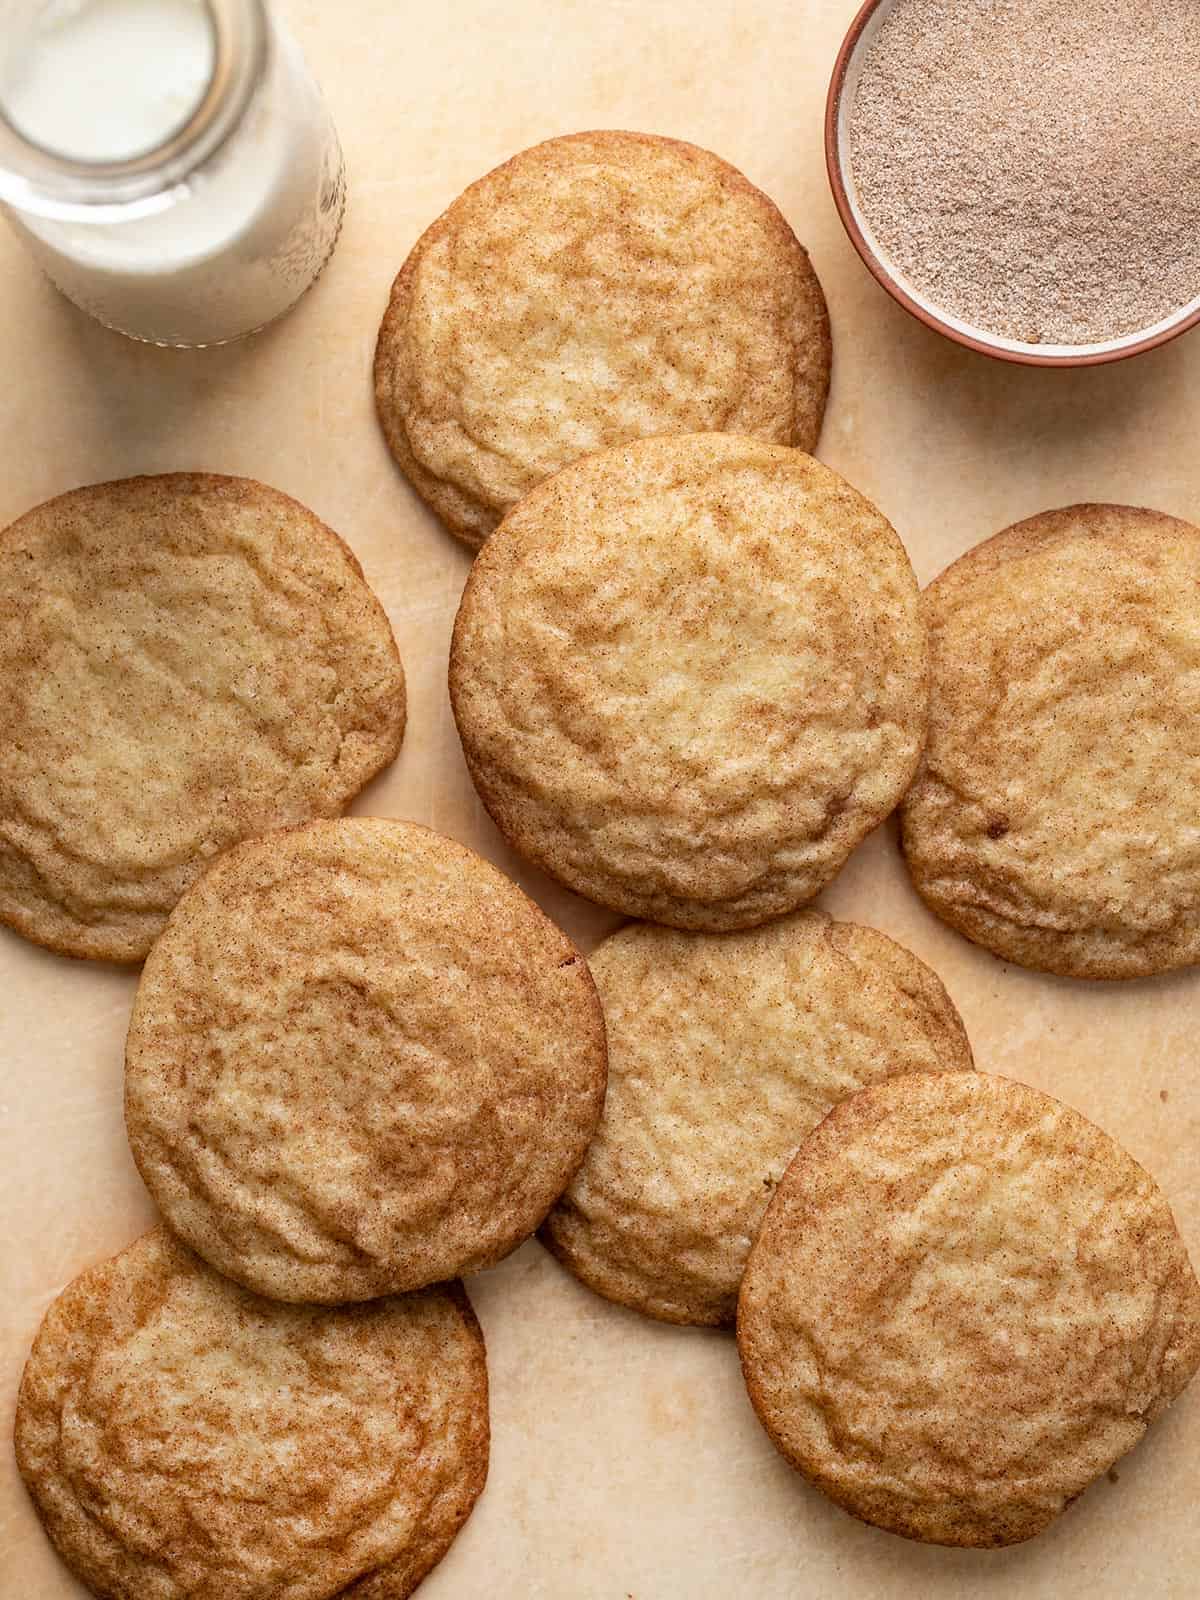 Overhead shot of snickerdoodles next to a glass of milk.